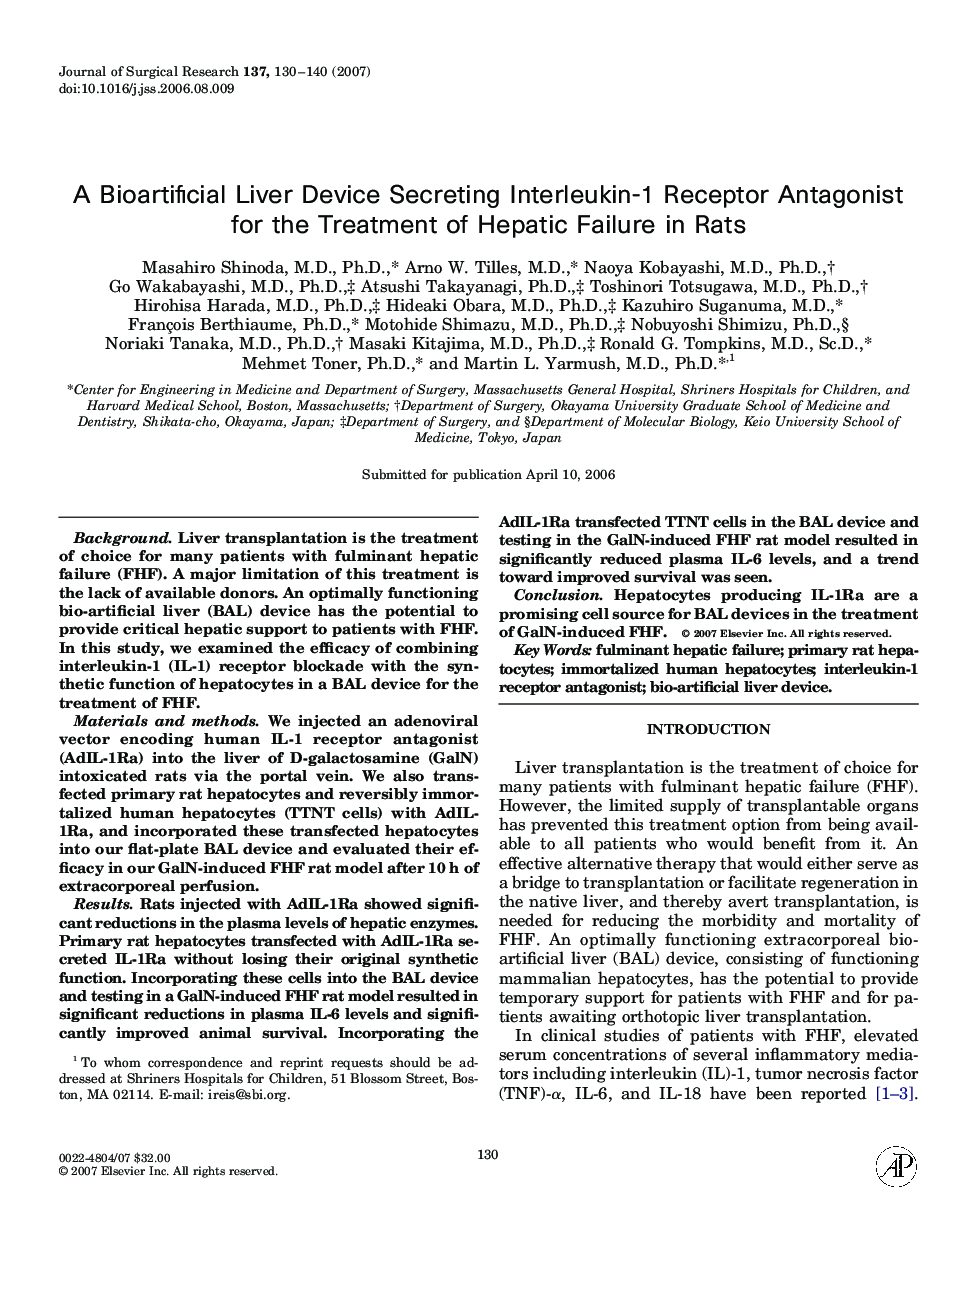 A Bioartificial Liver Device Secreting Interleukin-1 Receptor Antagonist for the Treatment of Hepatic Failure in Rats